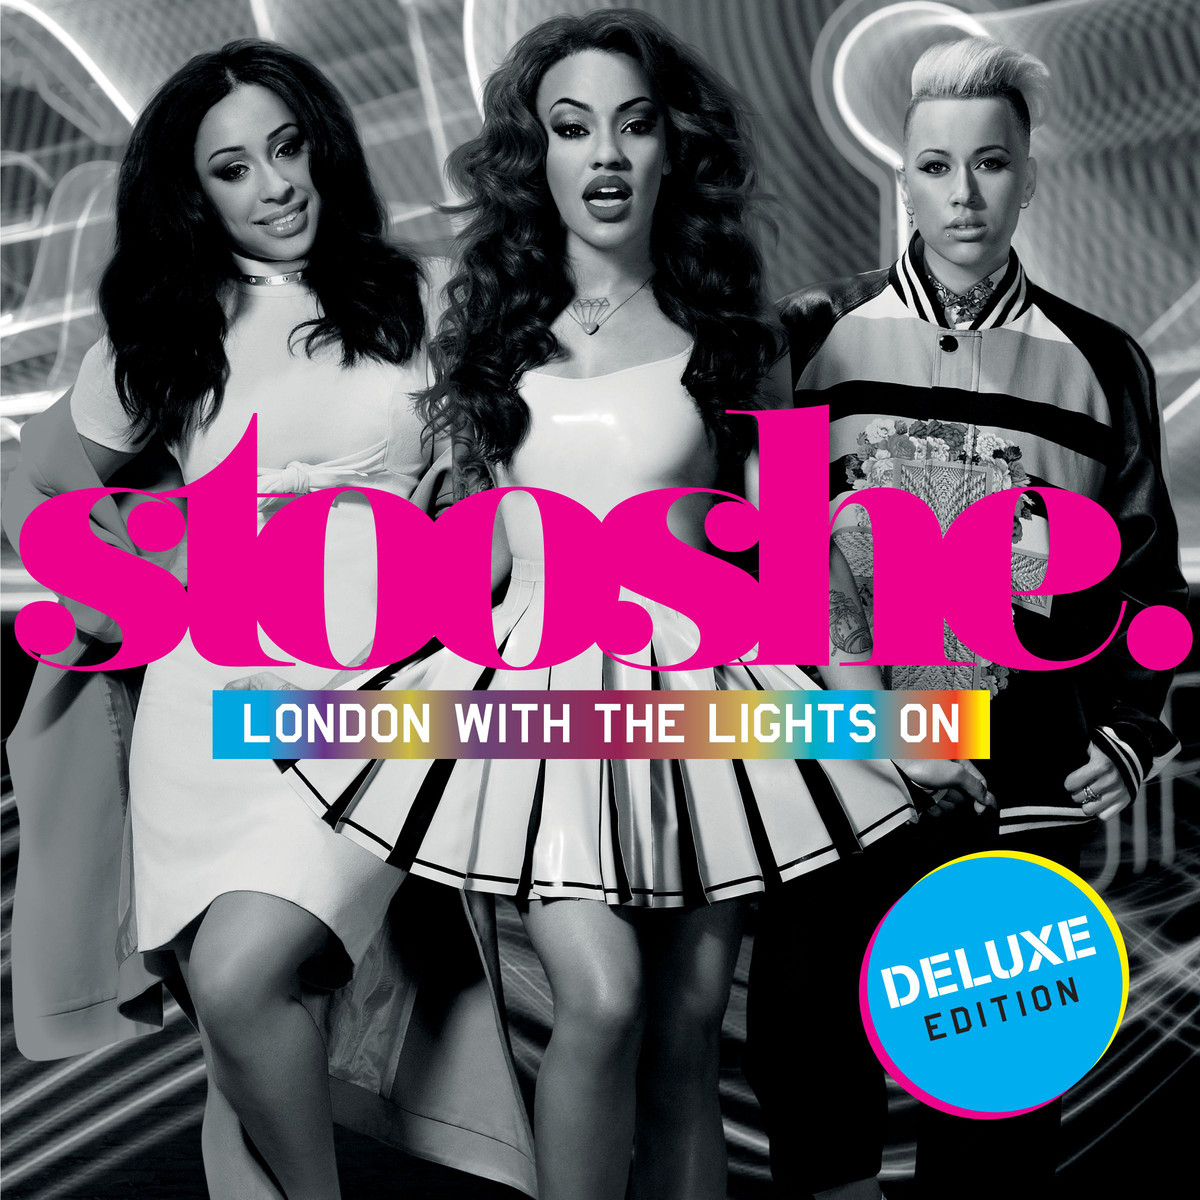 News Added Apr 30, 2013 “London with the Lights On” (previously named “Stooshe“) is the upcoming debut studio album by three-piece British R&B girl group Stooshe. It was originally set for release on 25 June 2012, later was held back to 26 November 2012. Finally, the album with the new name will be released on […]